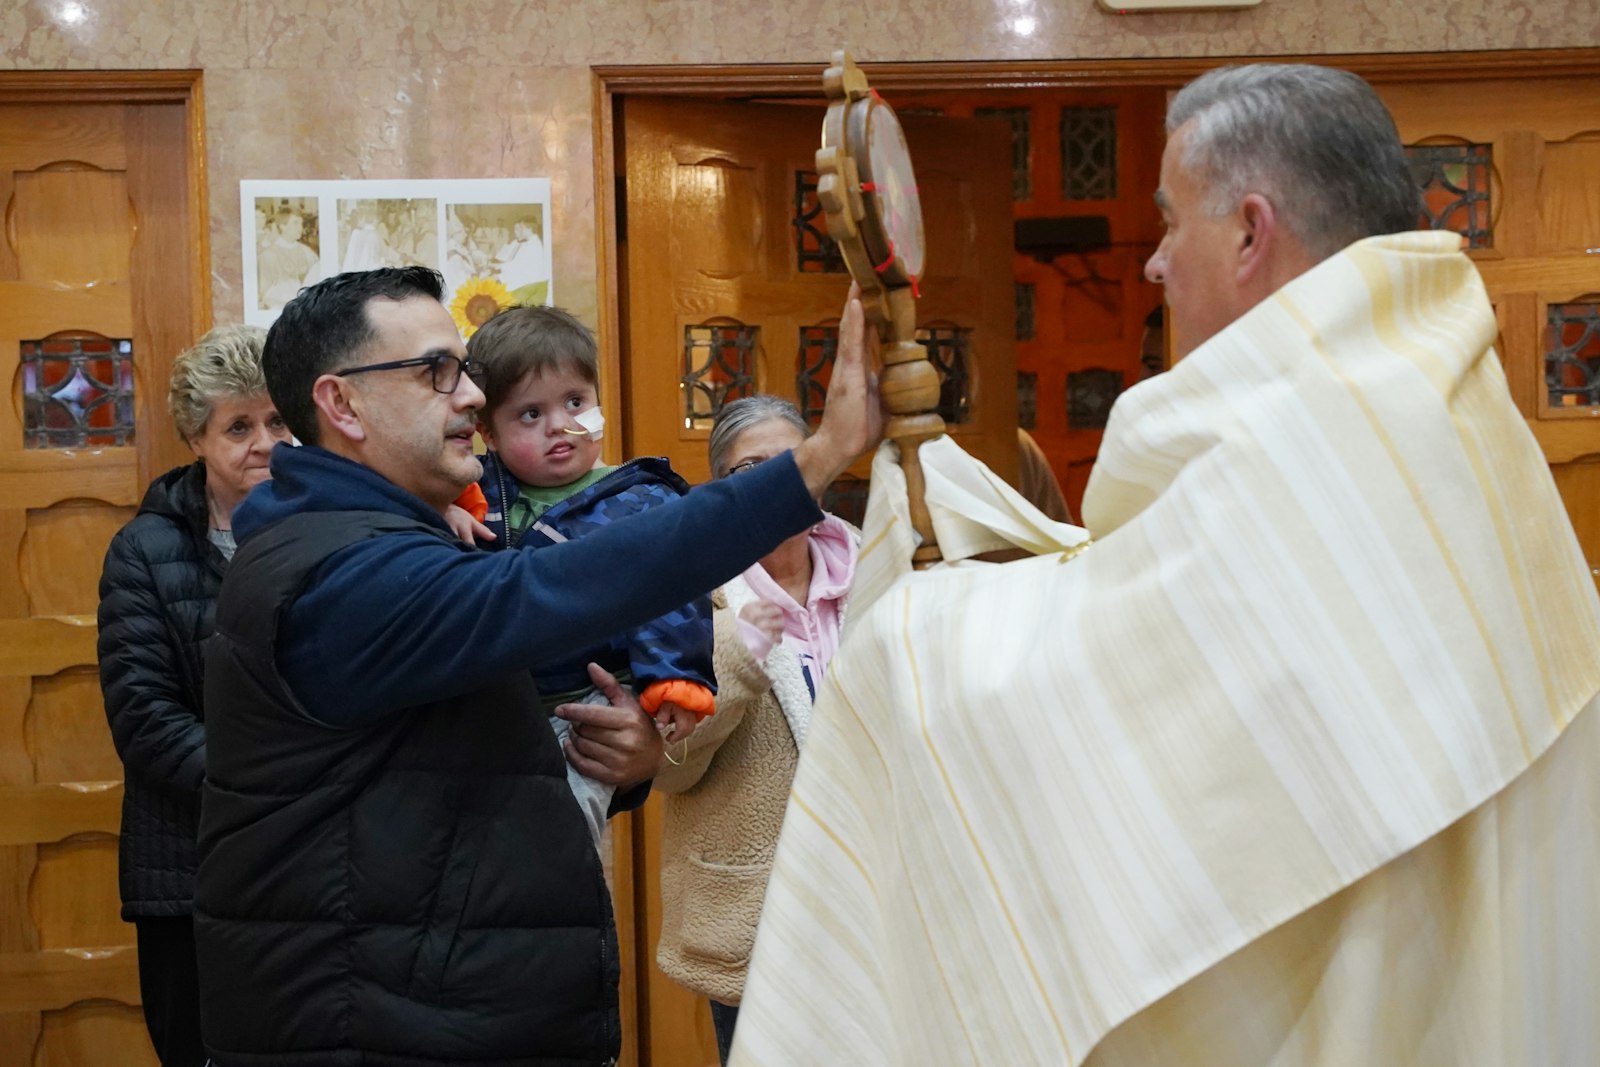 Mario Gonzalez holds up his son, Damien, to the relic of St. Padre Pio, held by Fr. Zbigniew Grankowski of St. Barbara Parish in Dearborn. Damien had open-heart surgery six weeks ago and spent a month in the hospital. His family came to St. Barbara Parish on Nov. 17 to ask for the intercession of St. Padre Pio in praying for his healing. Mario reports Damien has been doing well since the procedure. (Daniel Meloy | Detroit Catholic)